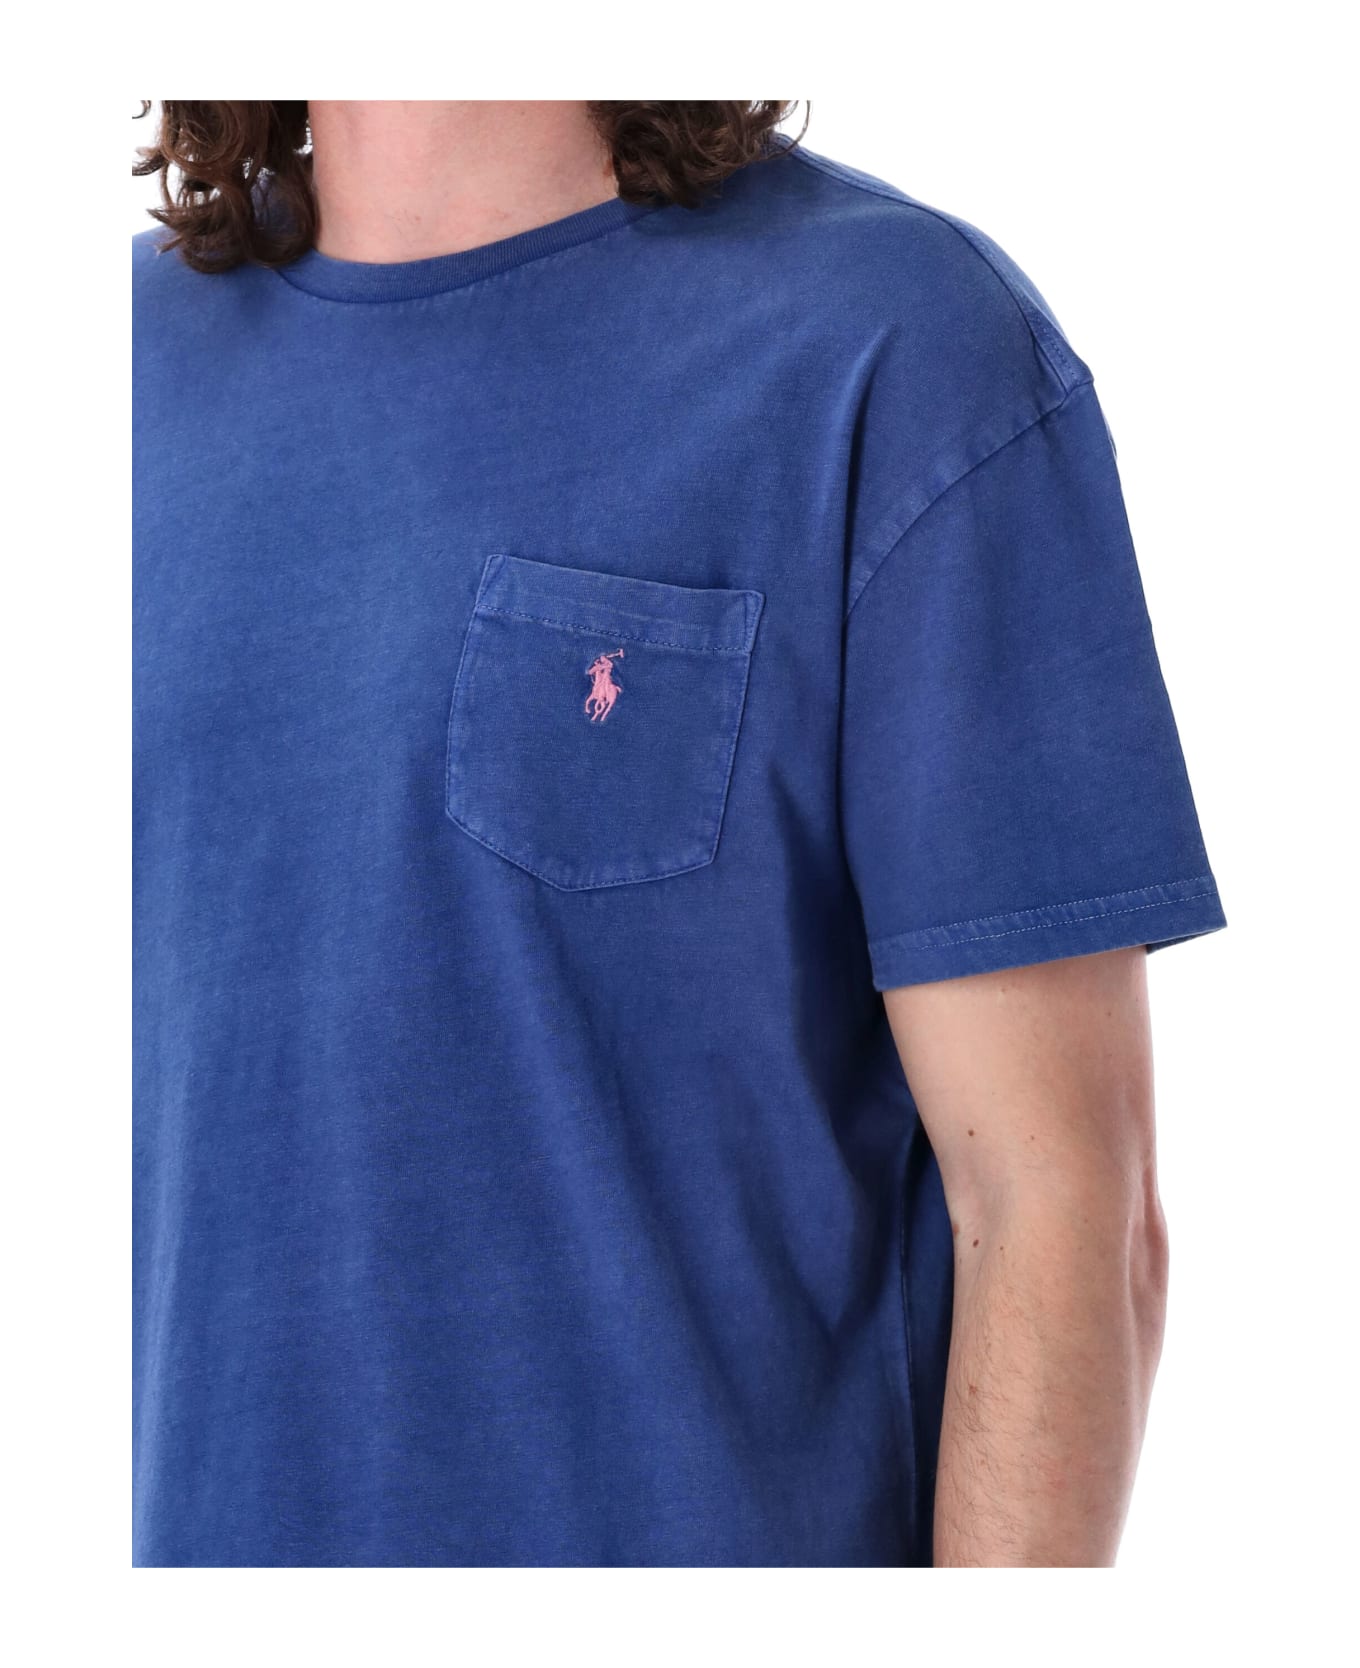 Polo Ralph Lauren Washed Pocket Tee - BLUE